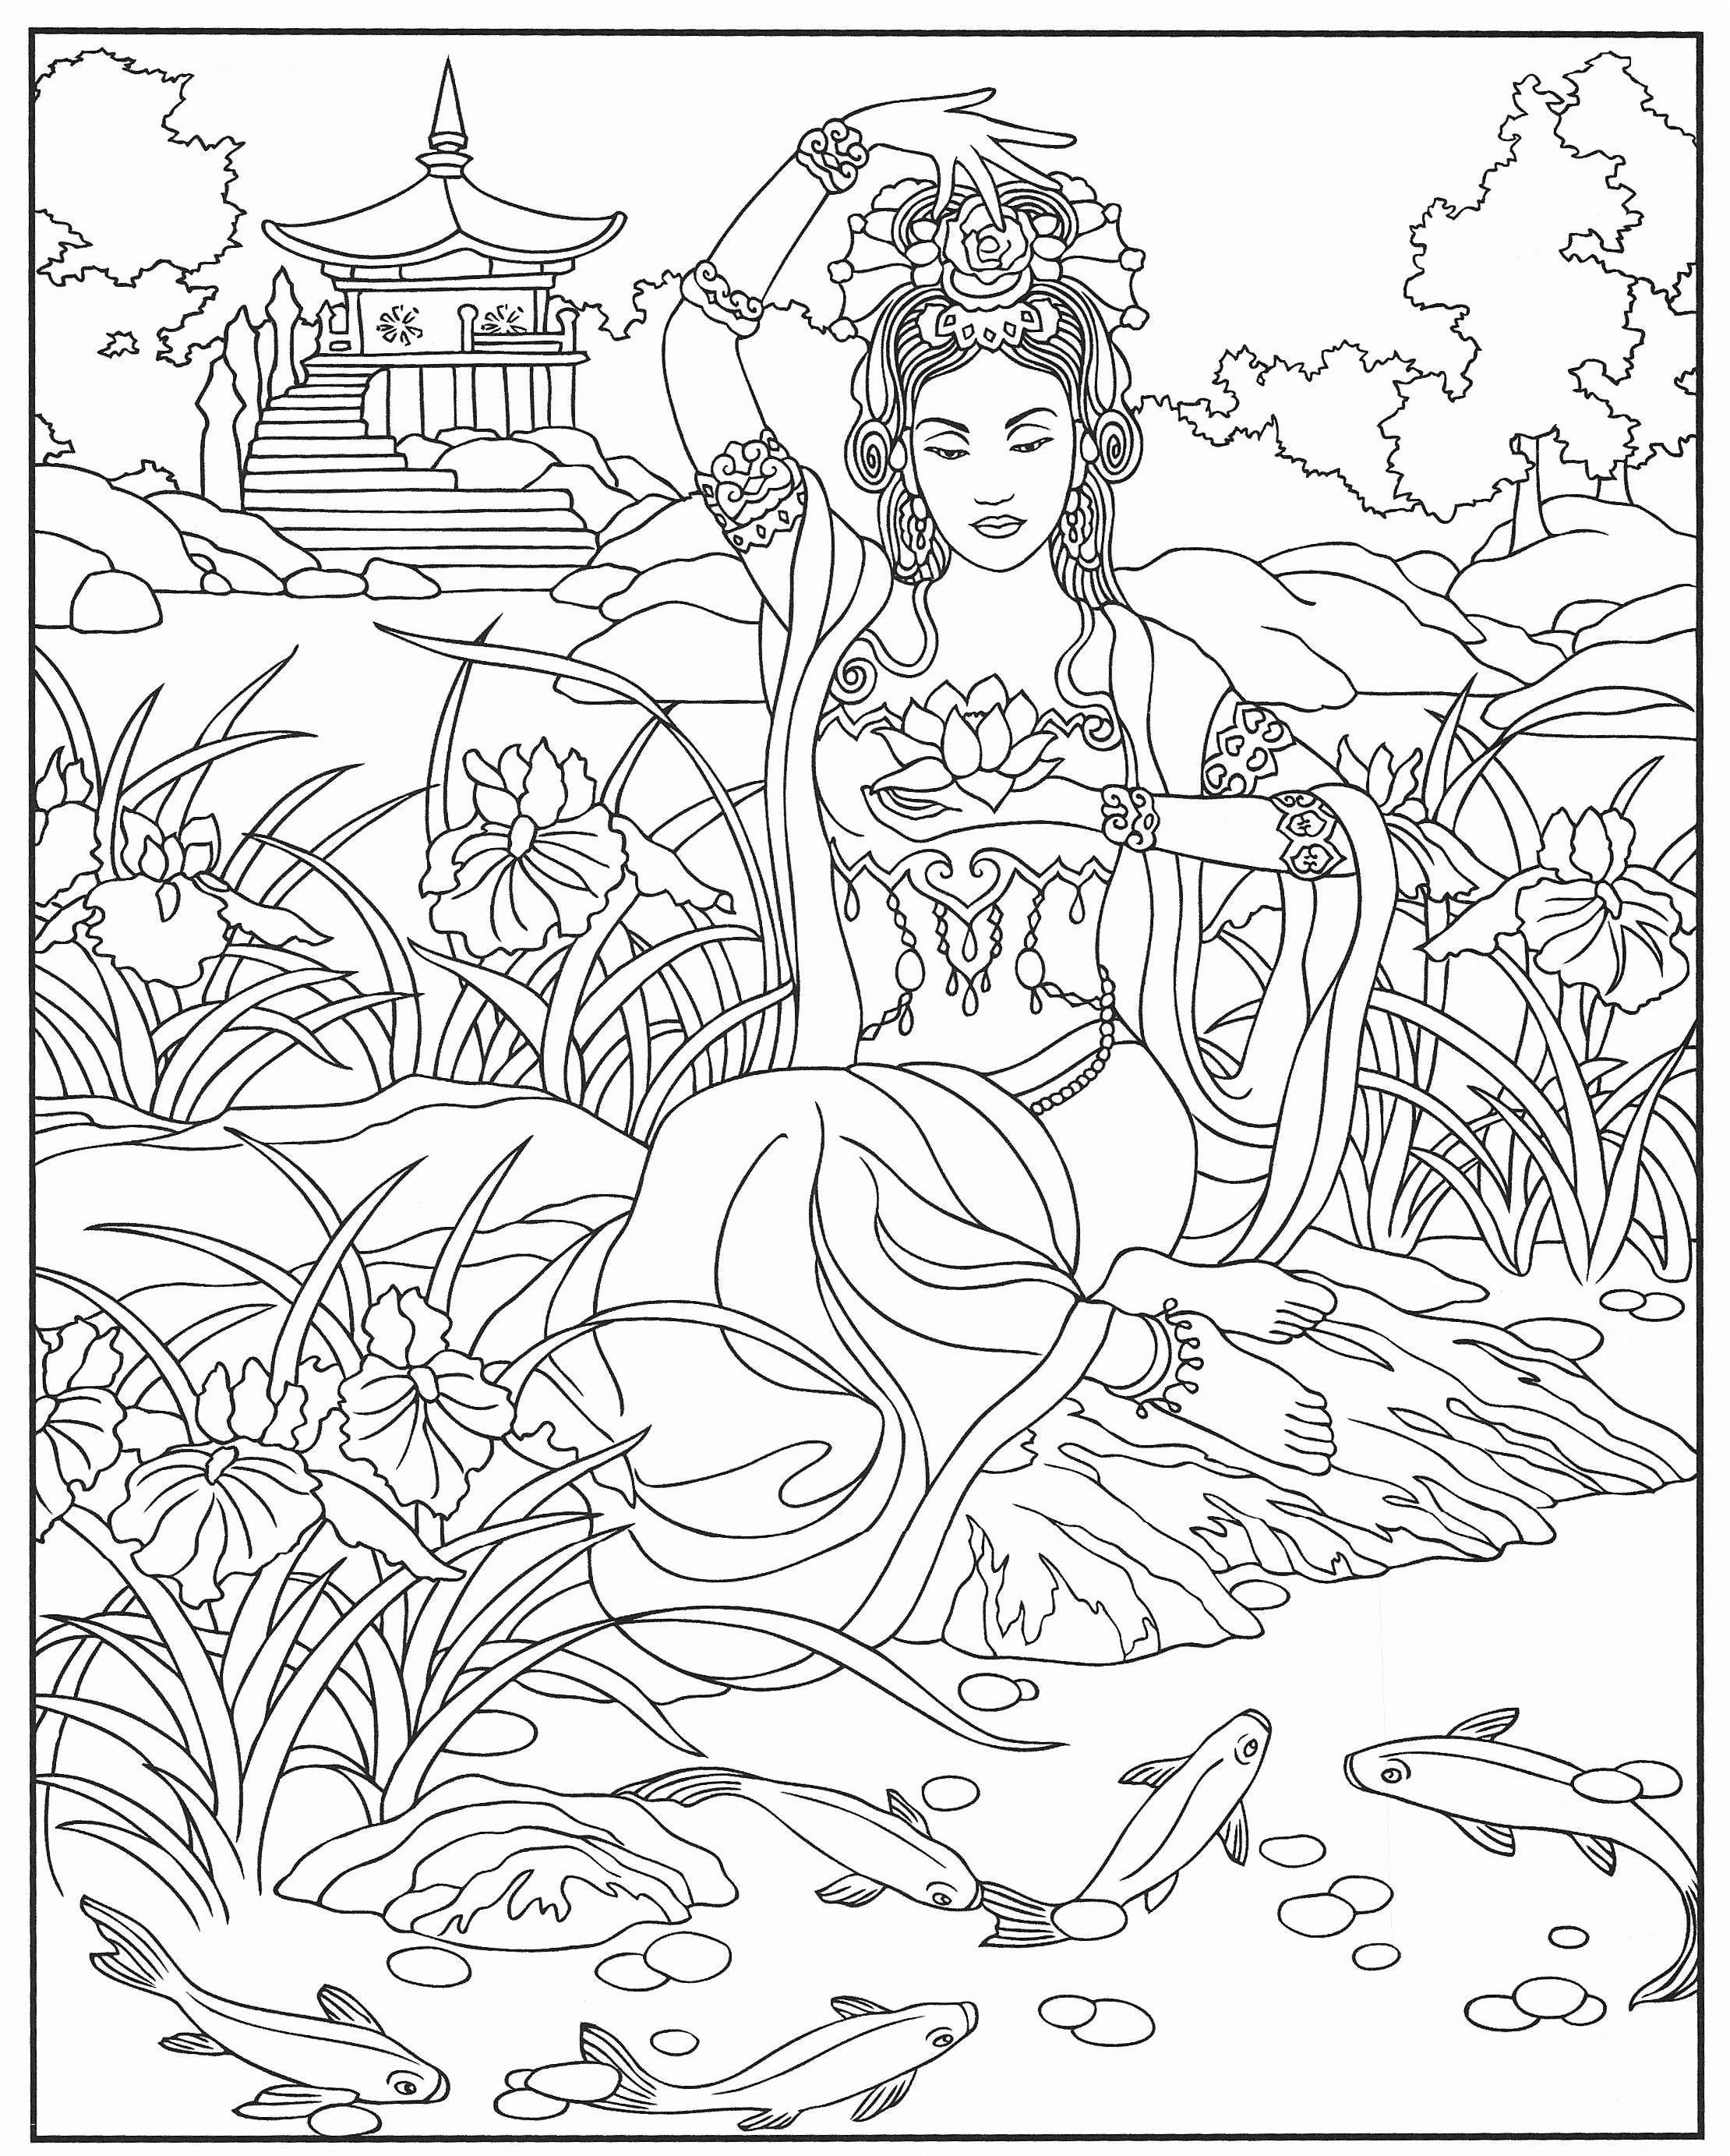 Coloring Games Adults Elegant Cool Coloring Page Unique Witch Coloring Pages New Crayola Pages 0d